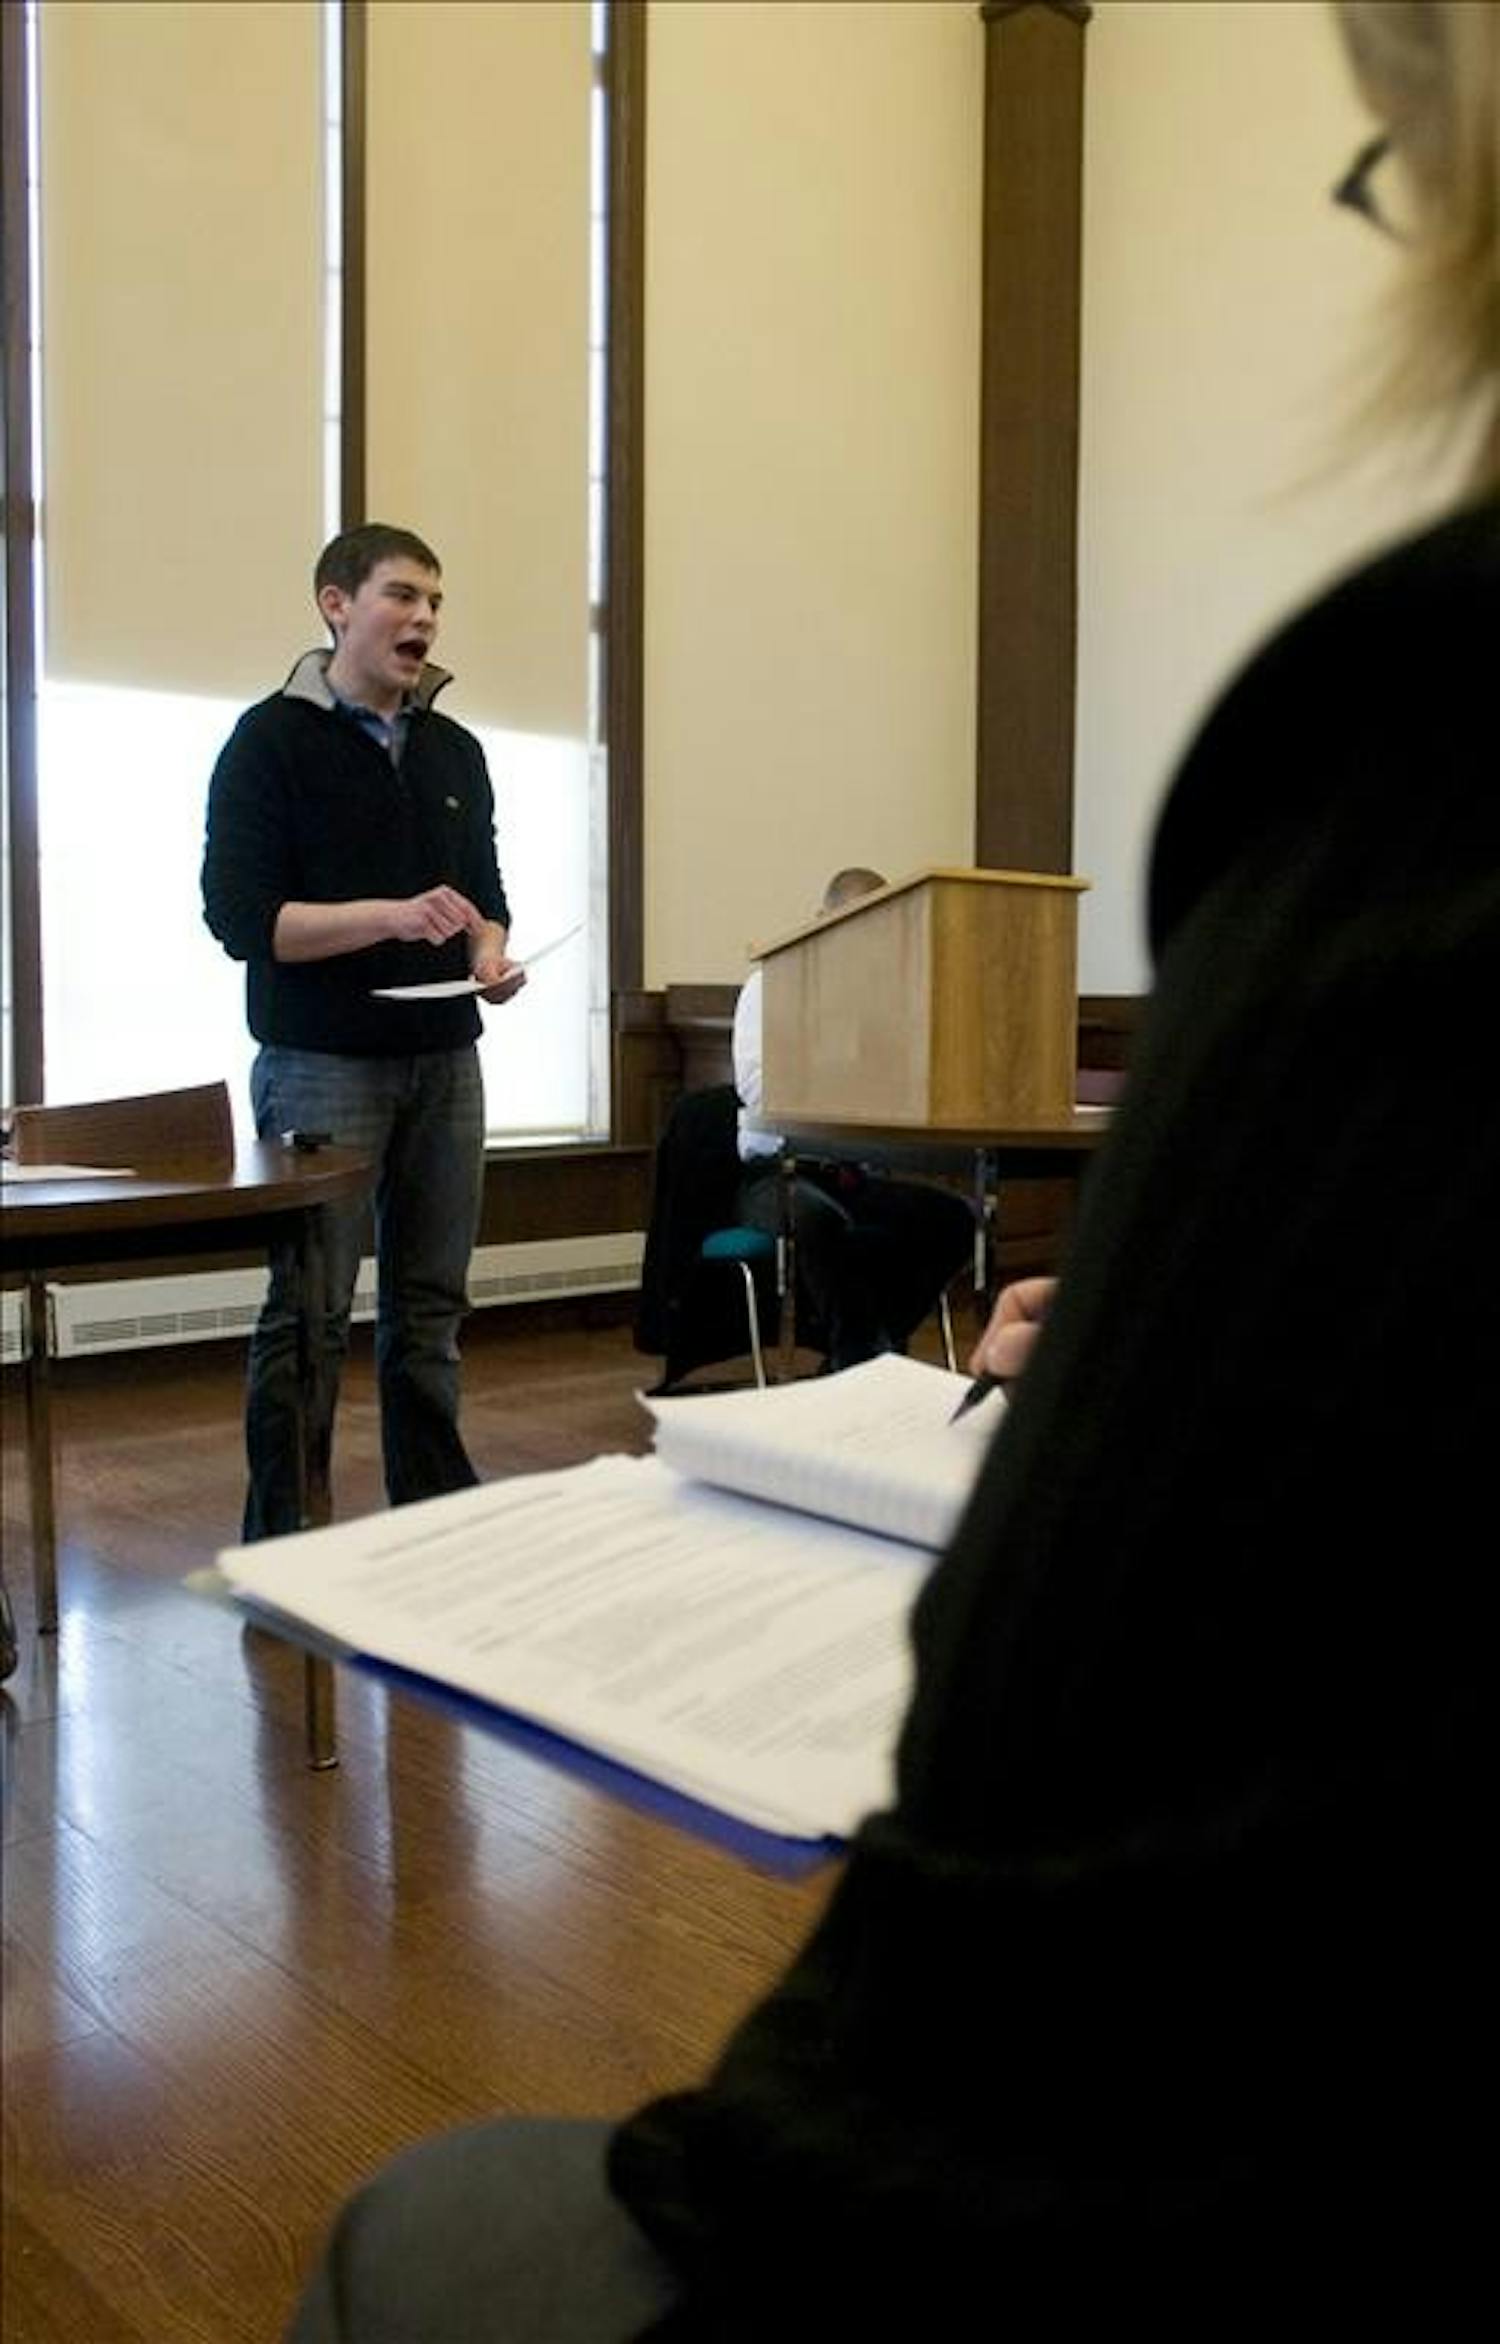 Ari Parker, student at the University of Illinois, delivers part of his speech to a panel of judges Sunday afternoon at the Hutton Honors College building. Parker was a participant in the Intervarsity Lincoln-Douglas Debate Competition sponsored by the new campus group, ABE at IU.